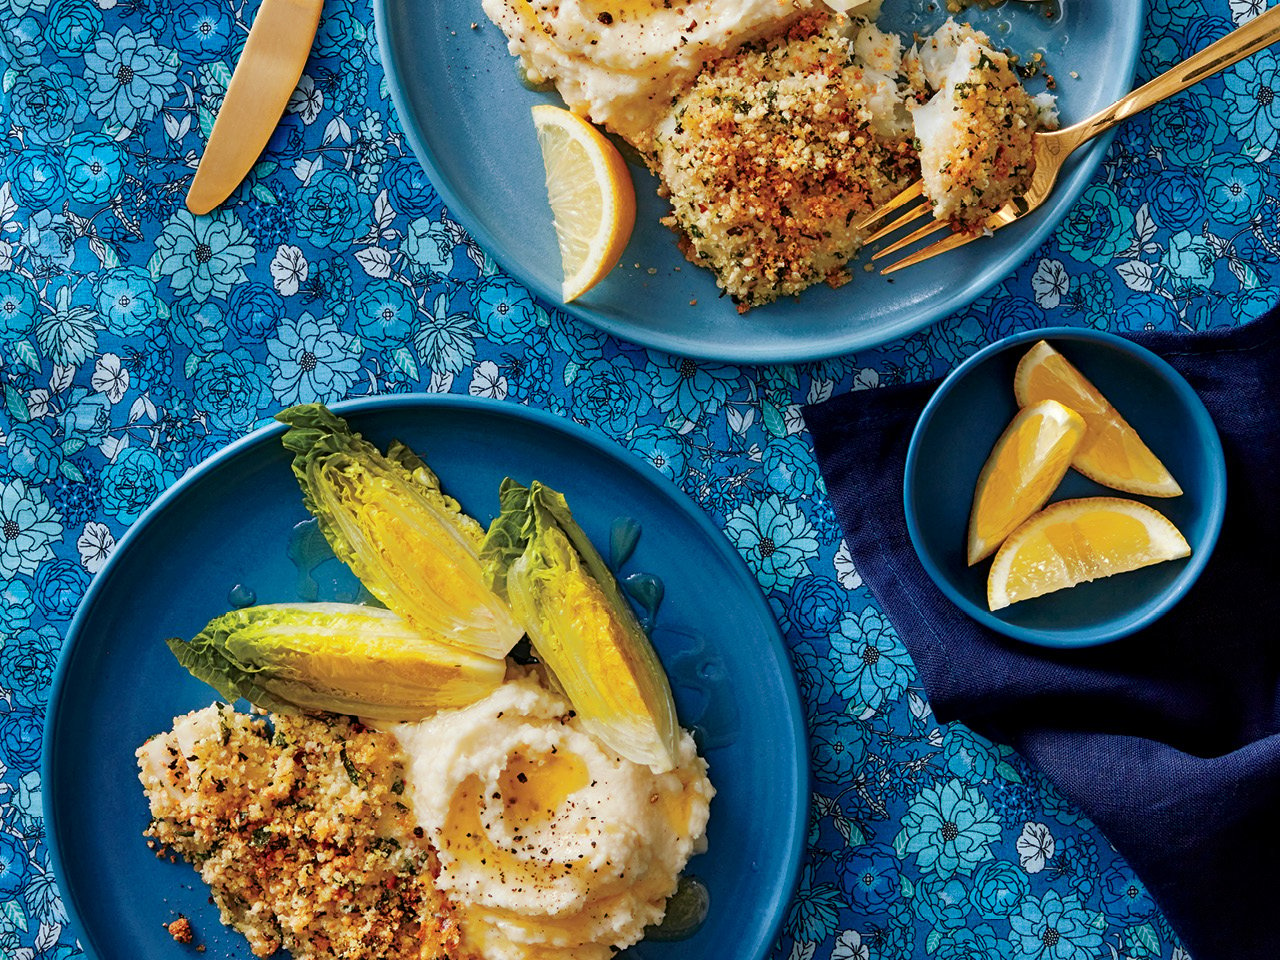 Herb-Crusted Haddock with Cauliflower Purée